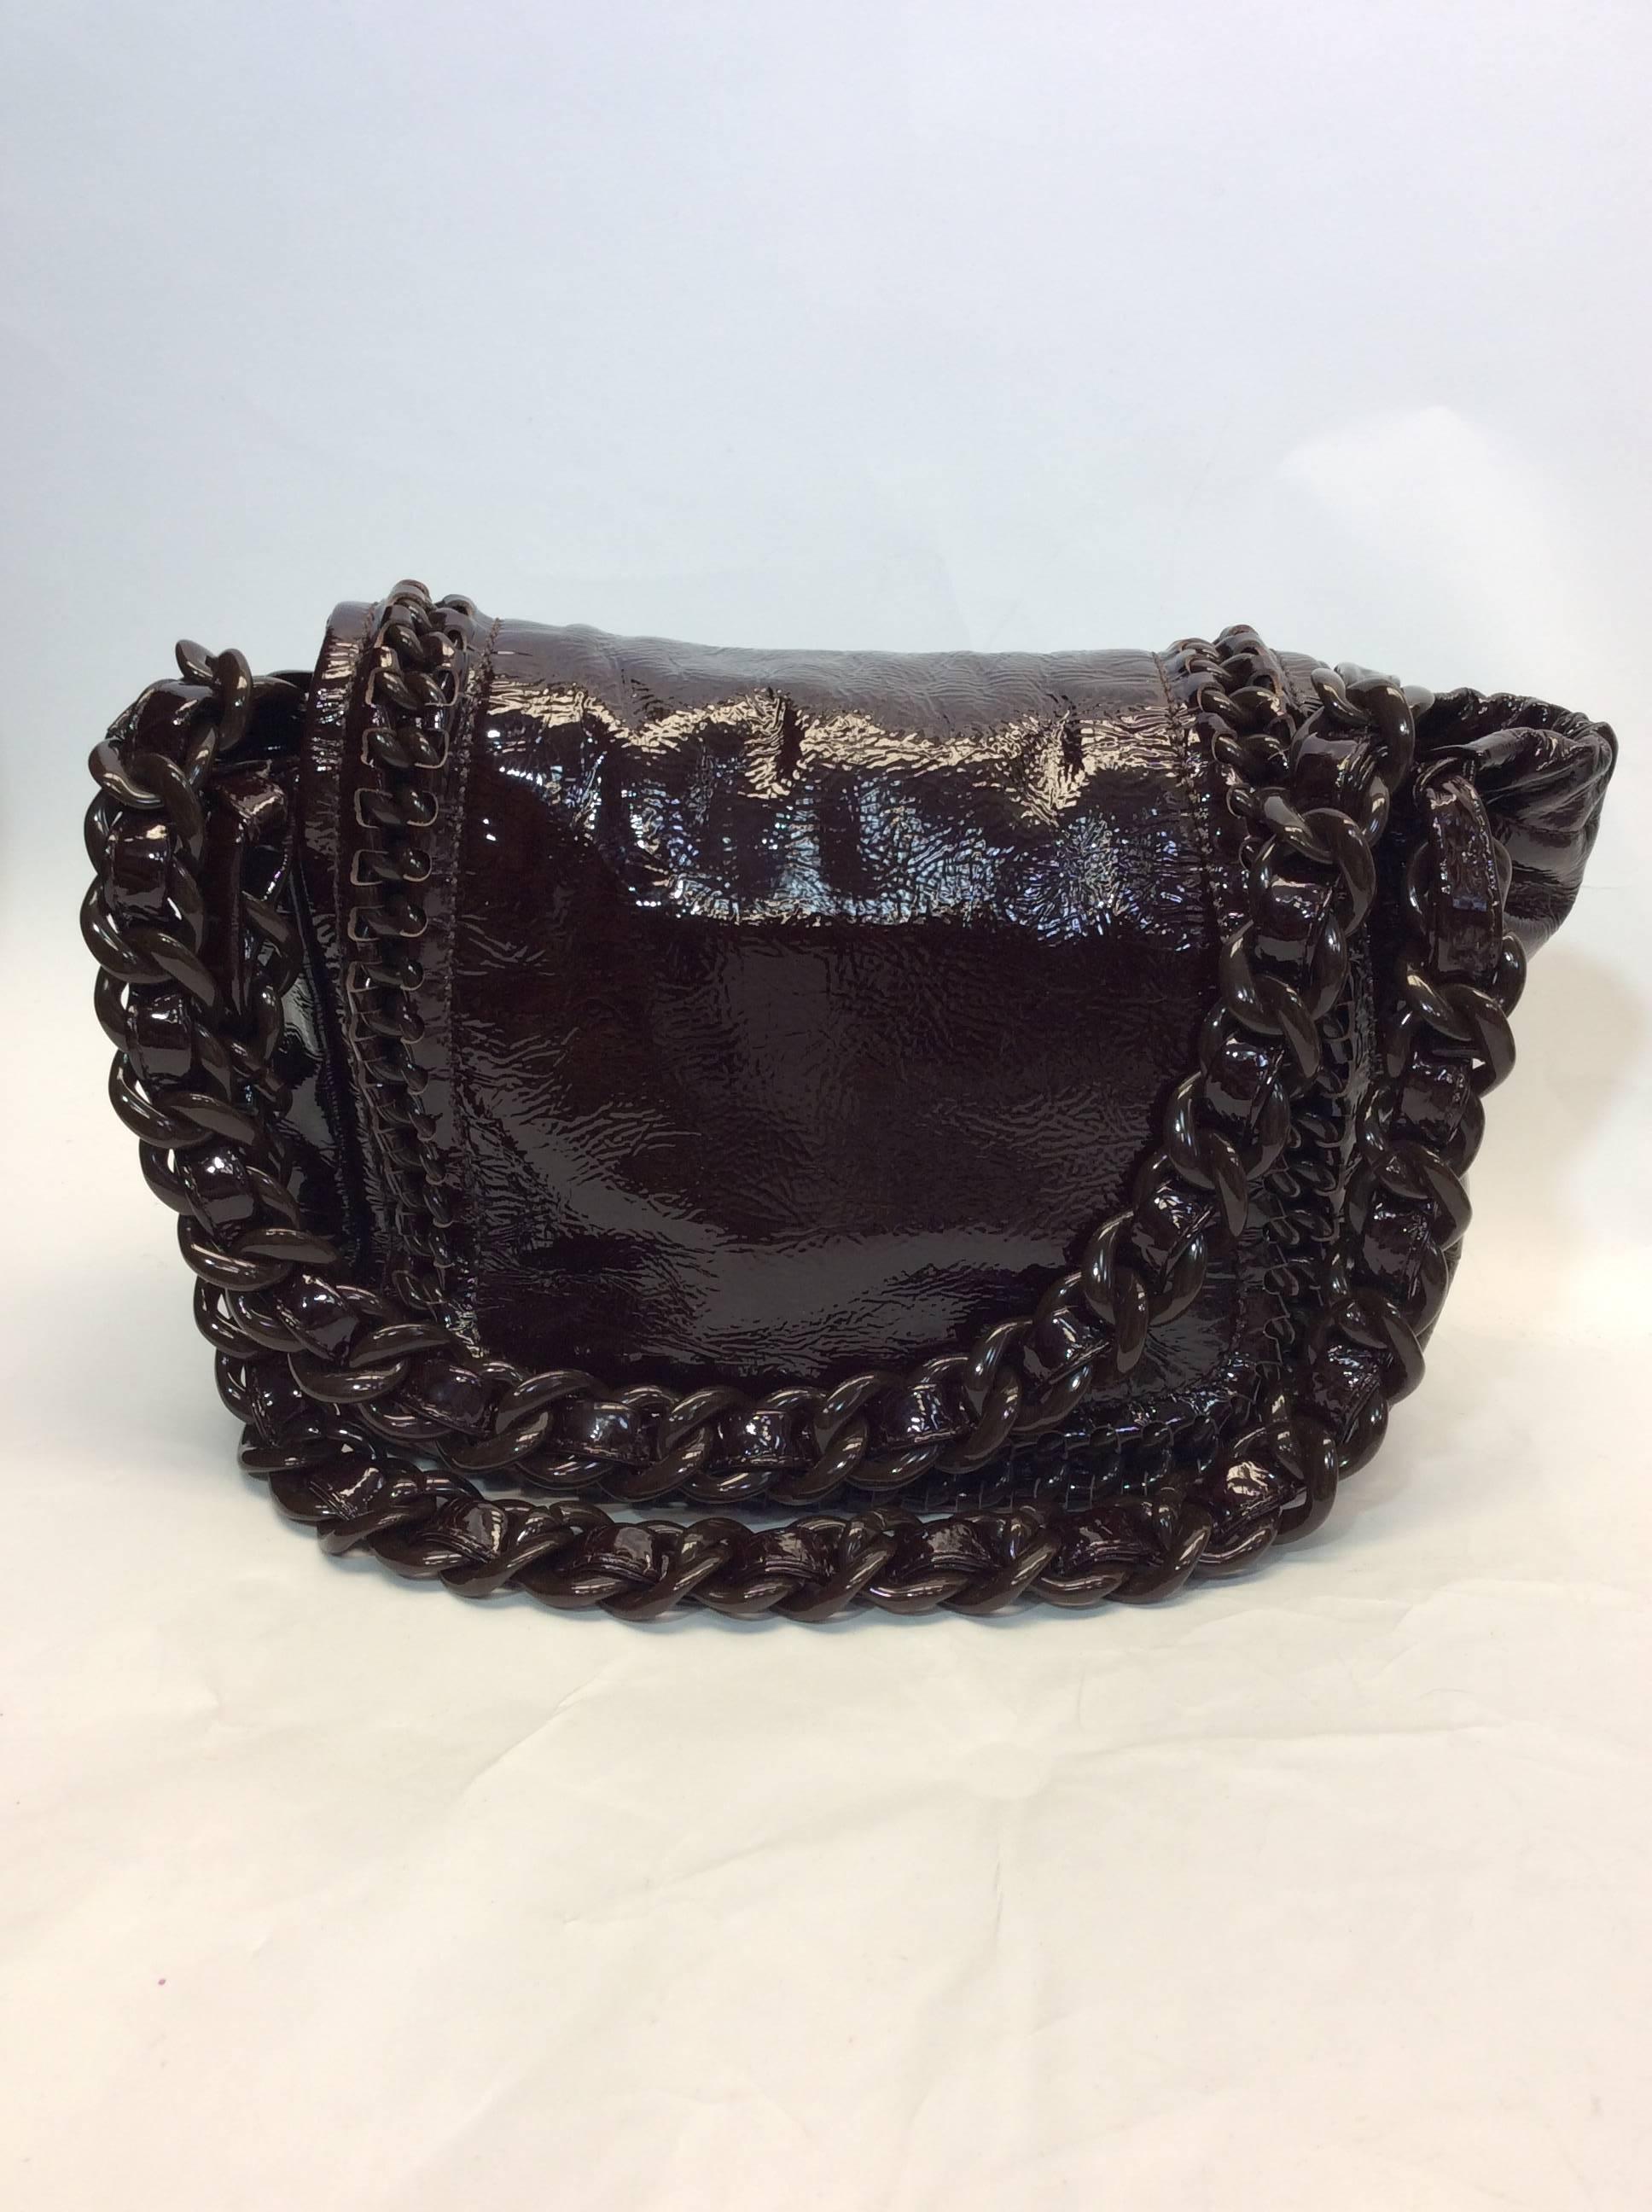 Chanel Chocolate Patent Leather Flap Bag  In Excellent Condition For Sale In Narberth, PA